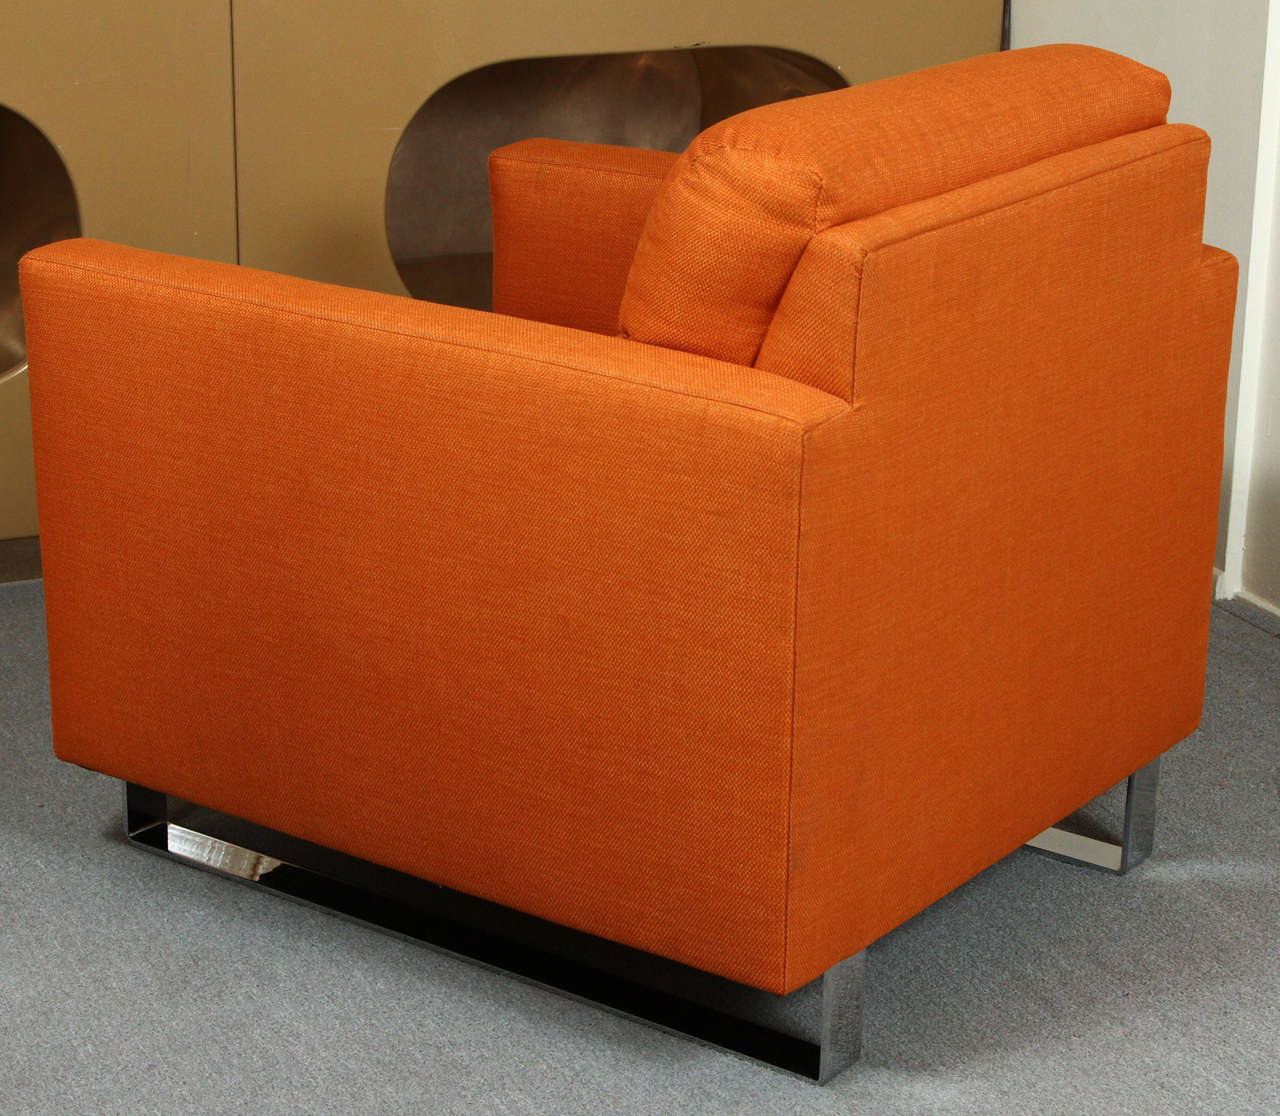 Pair of Stylish Modernist Club Chairs Upholstered in a Beautiful Orange Fabric 1